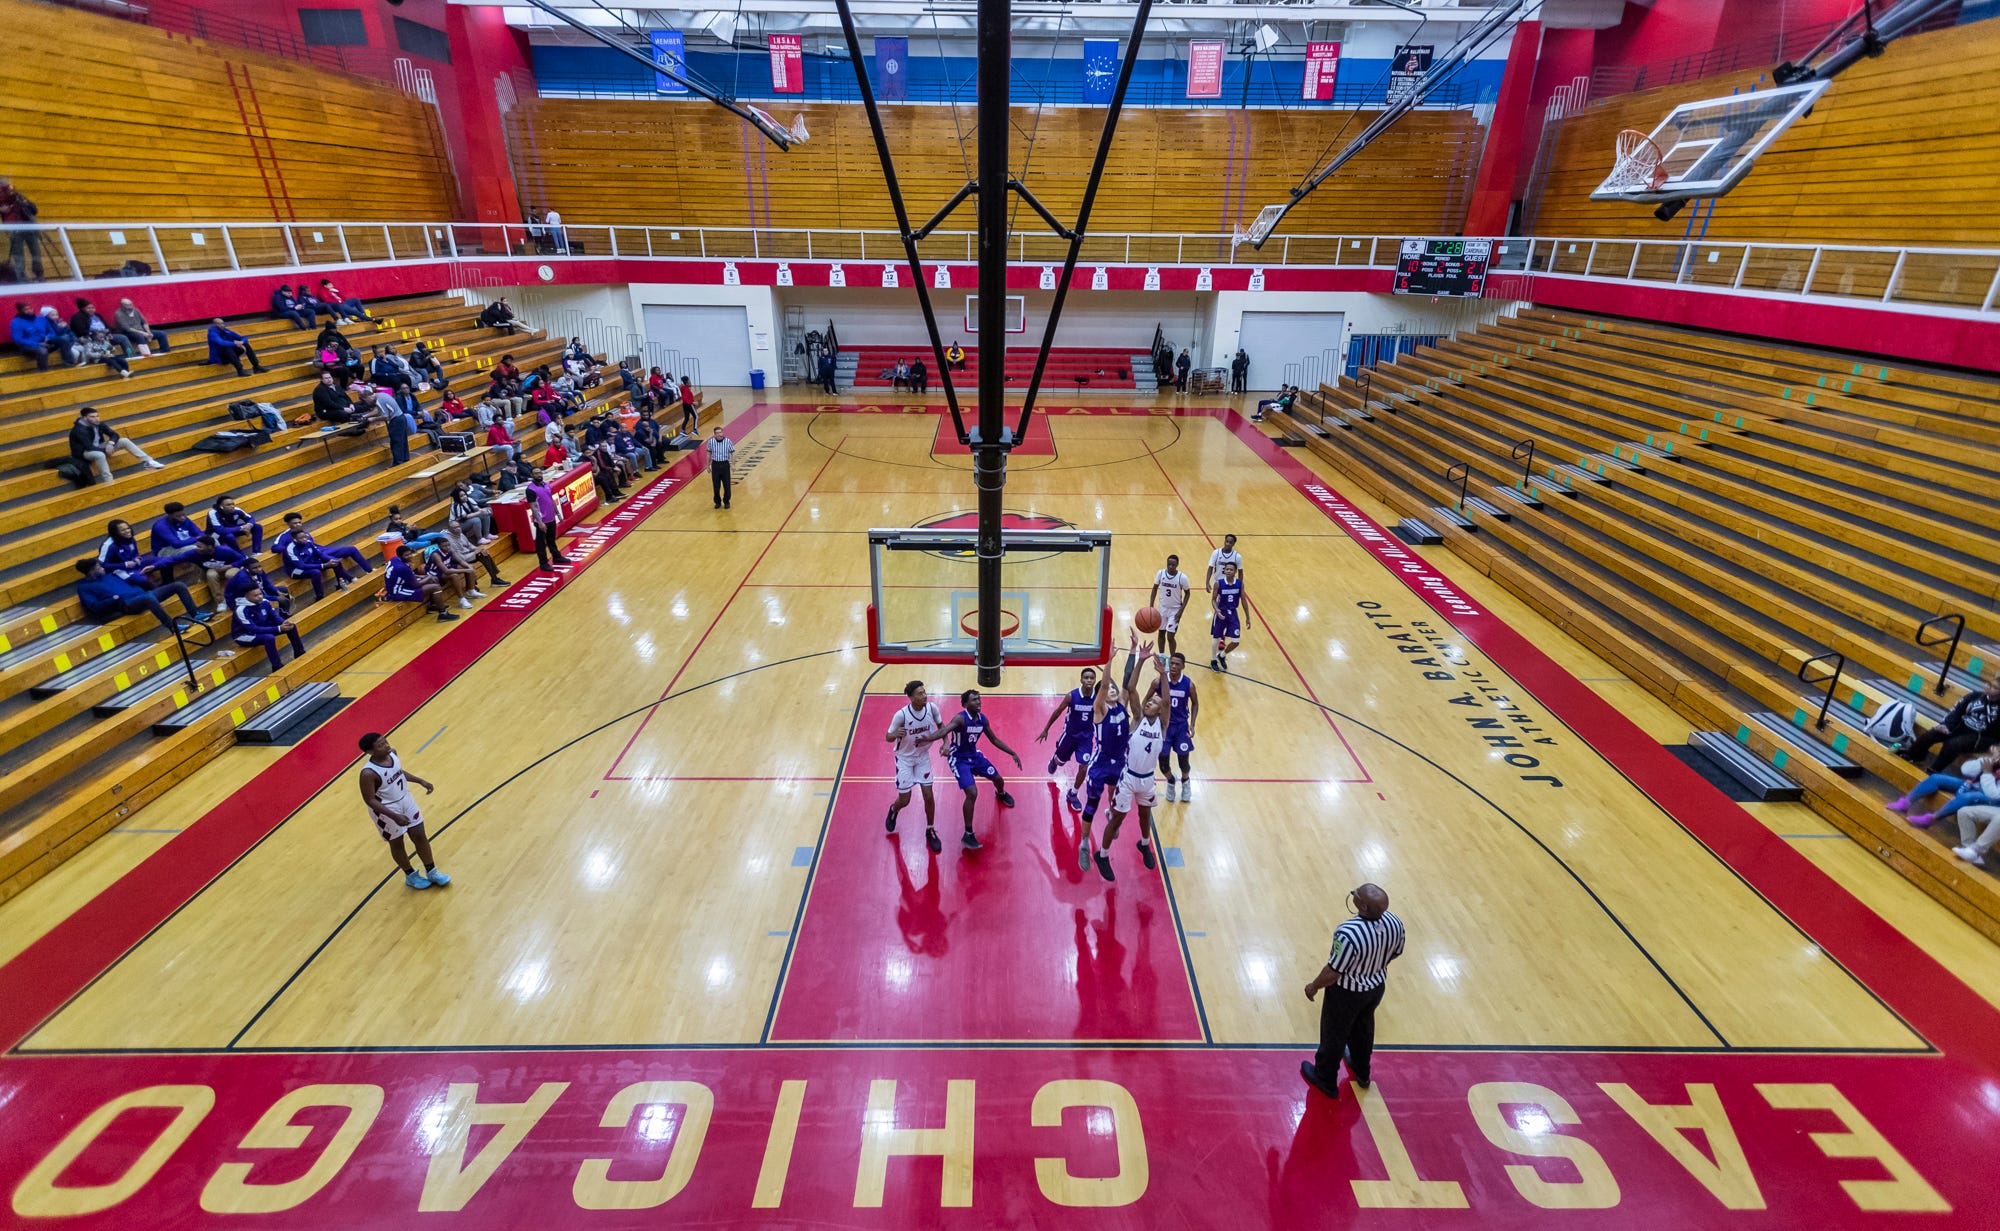 During a junior varsity game the East Chicago Cardinals face off against the Hammond Wildcats at East Chicago Central High School's John A. Baratto Athletic Center on Tuesday, Jan. 21, 2020.